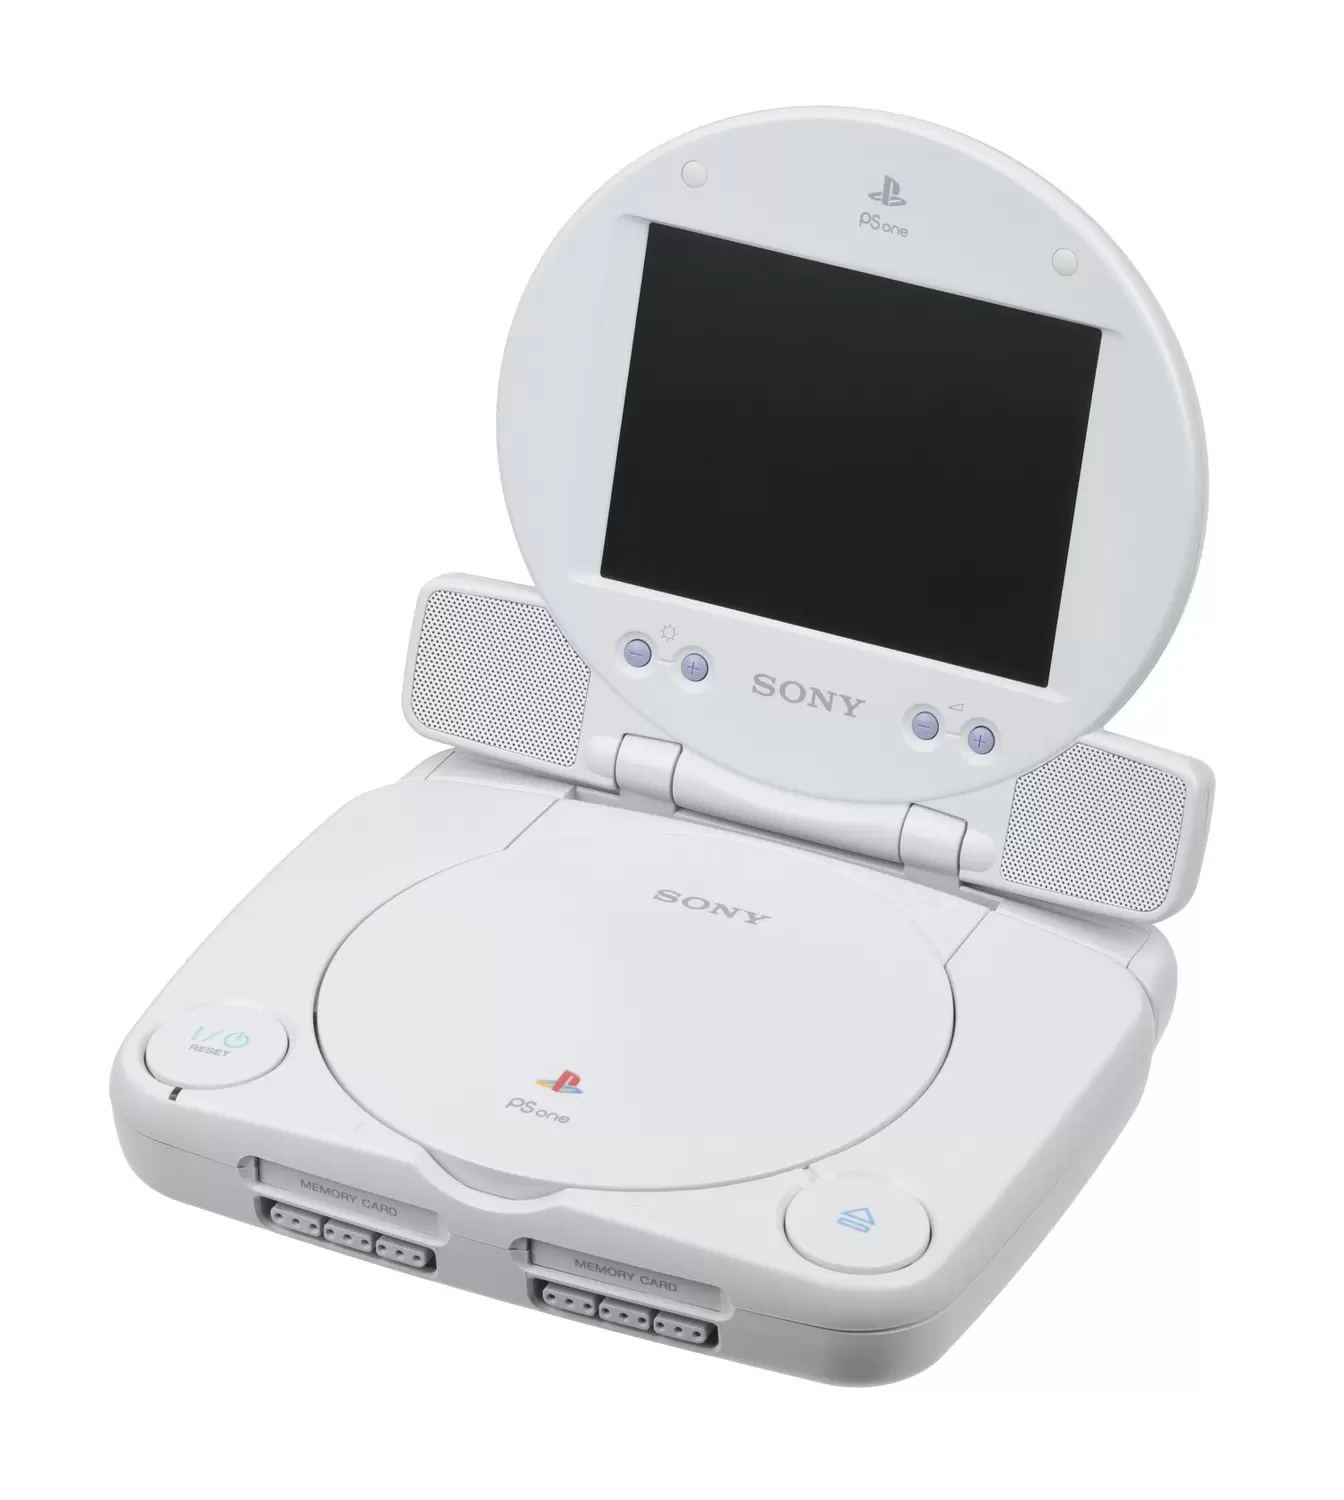 Matériel PlayStation - LCD screen for Playstation One